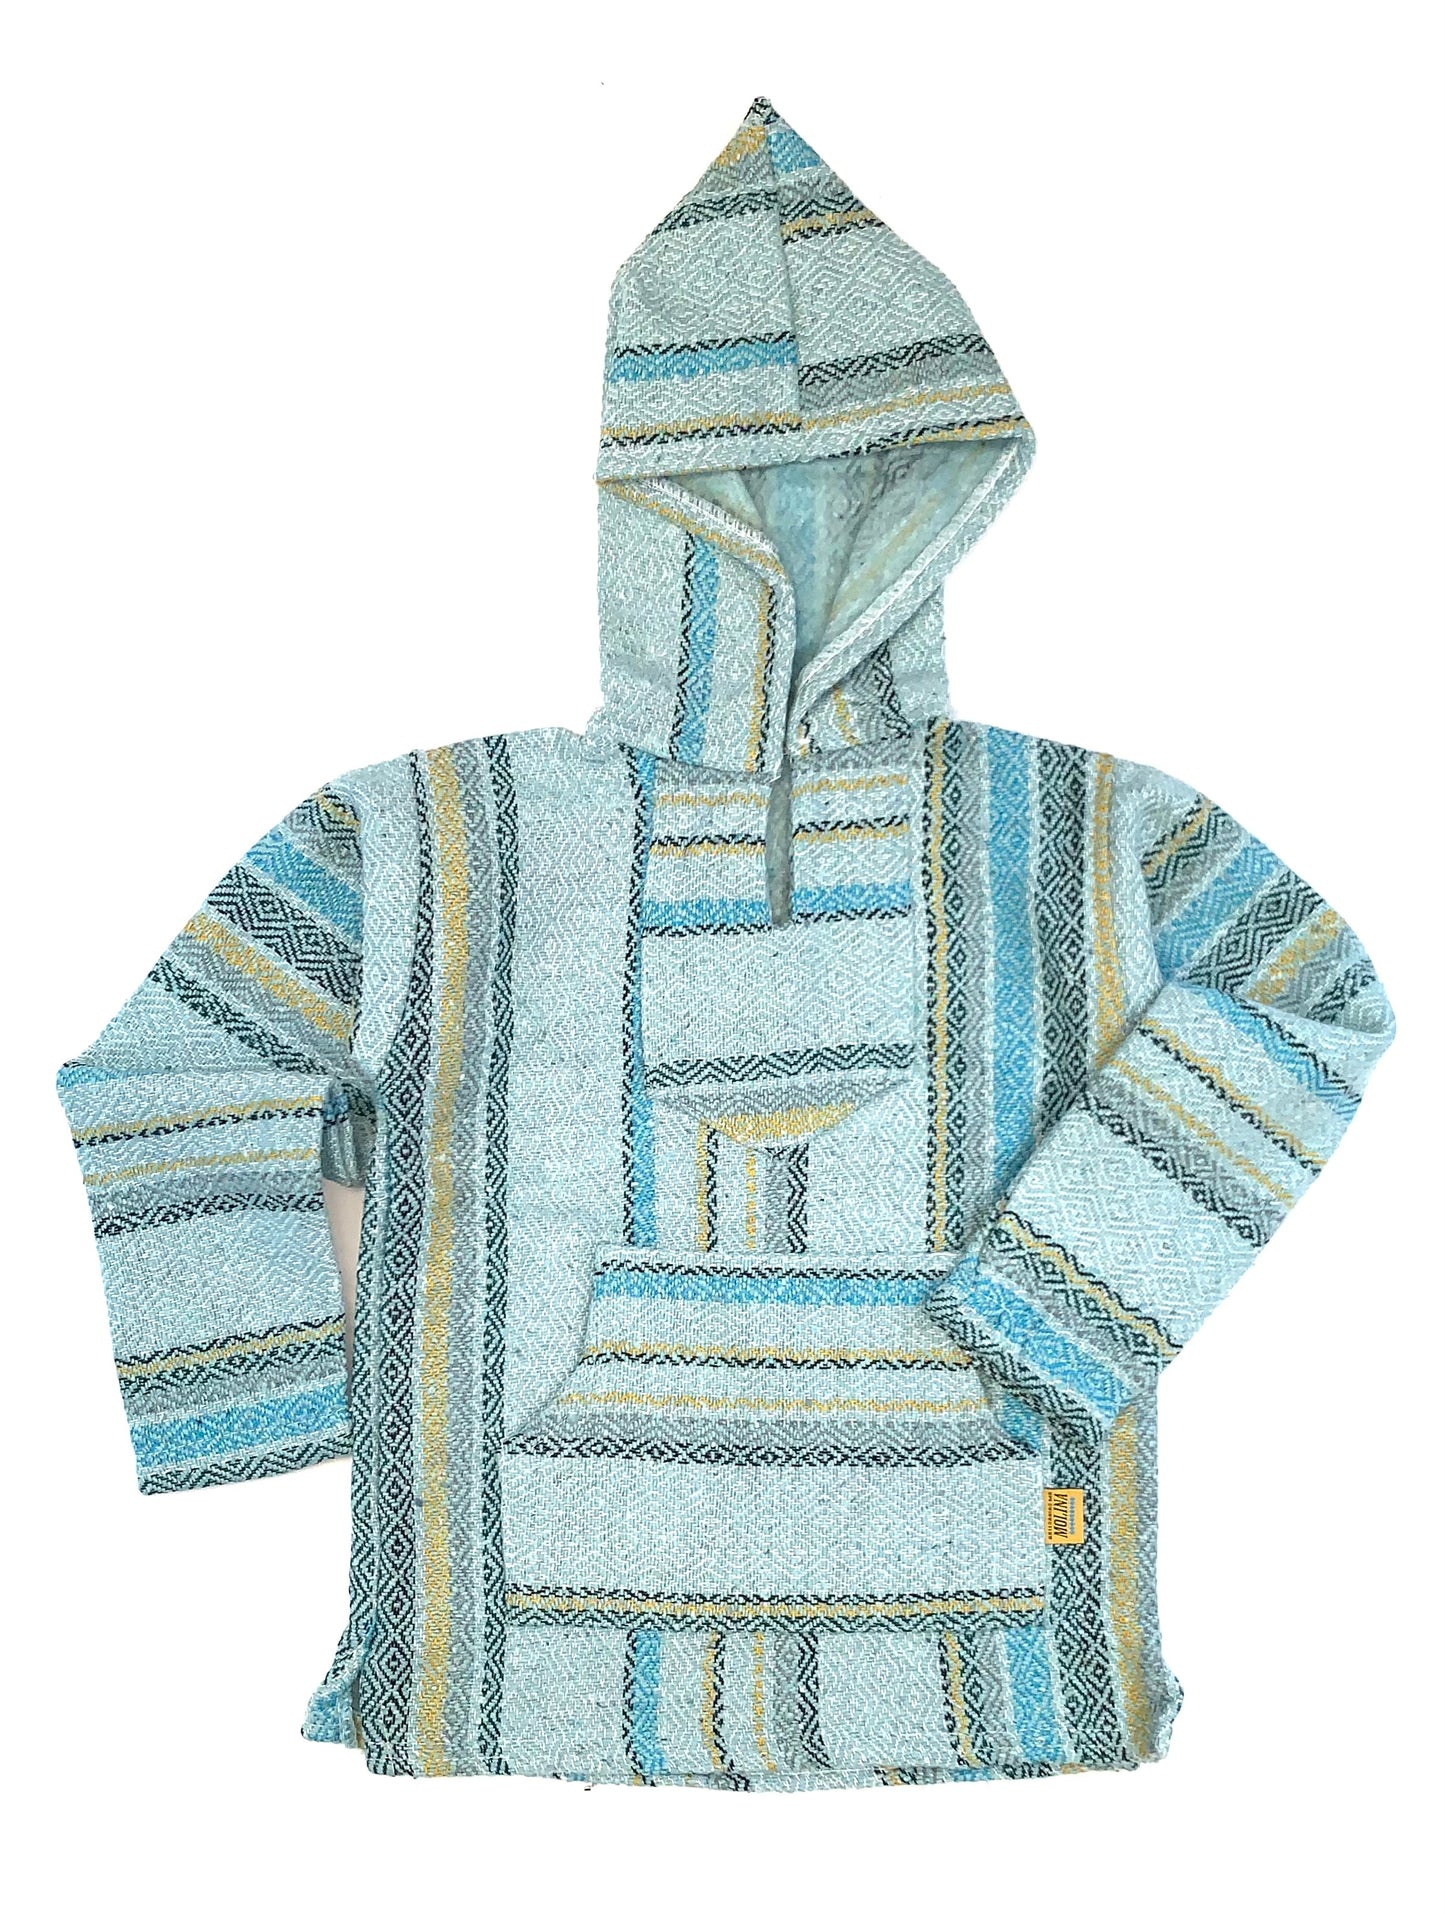 Limited Time Children's Small Mexican Baja Hoodies